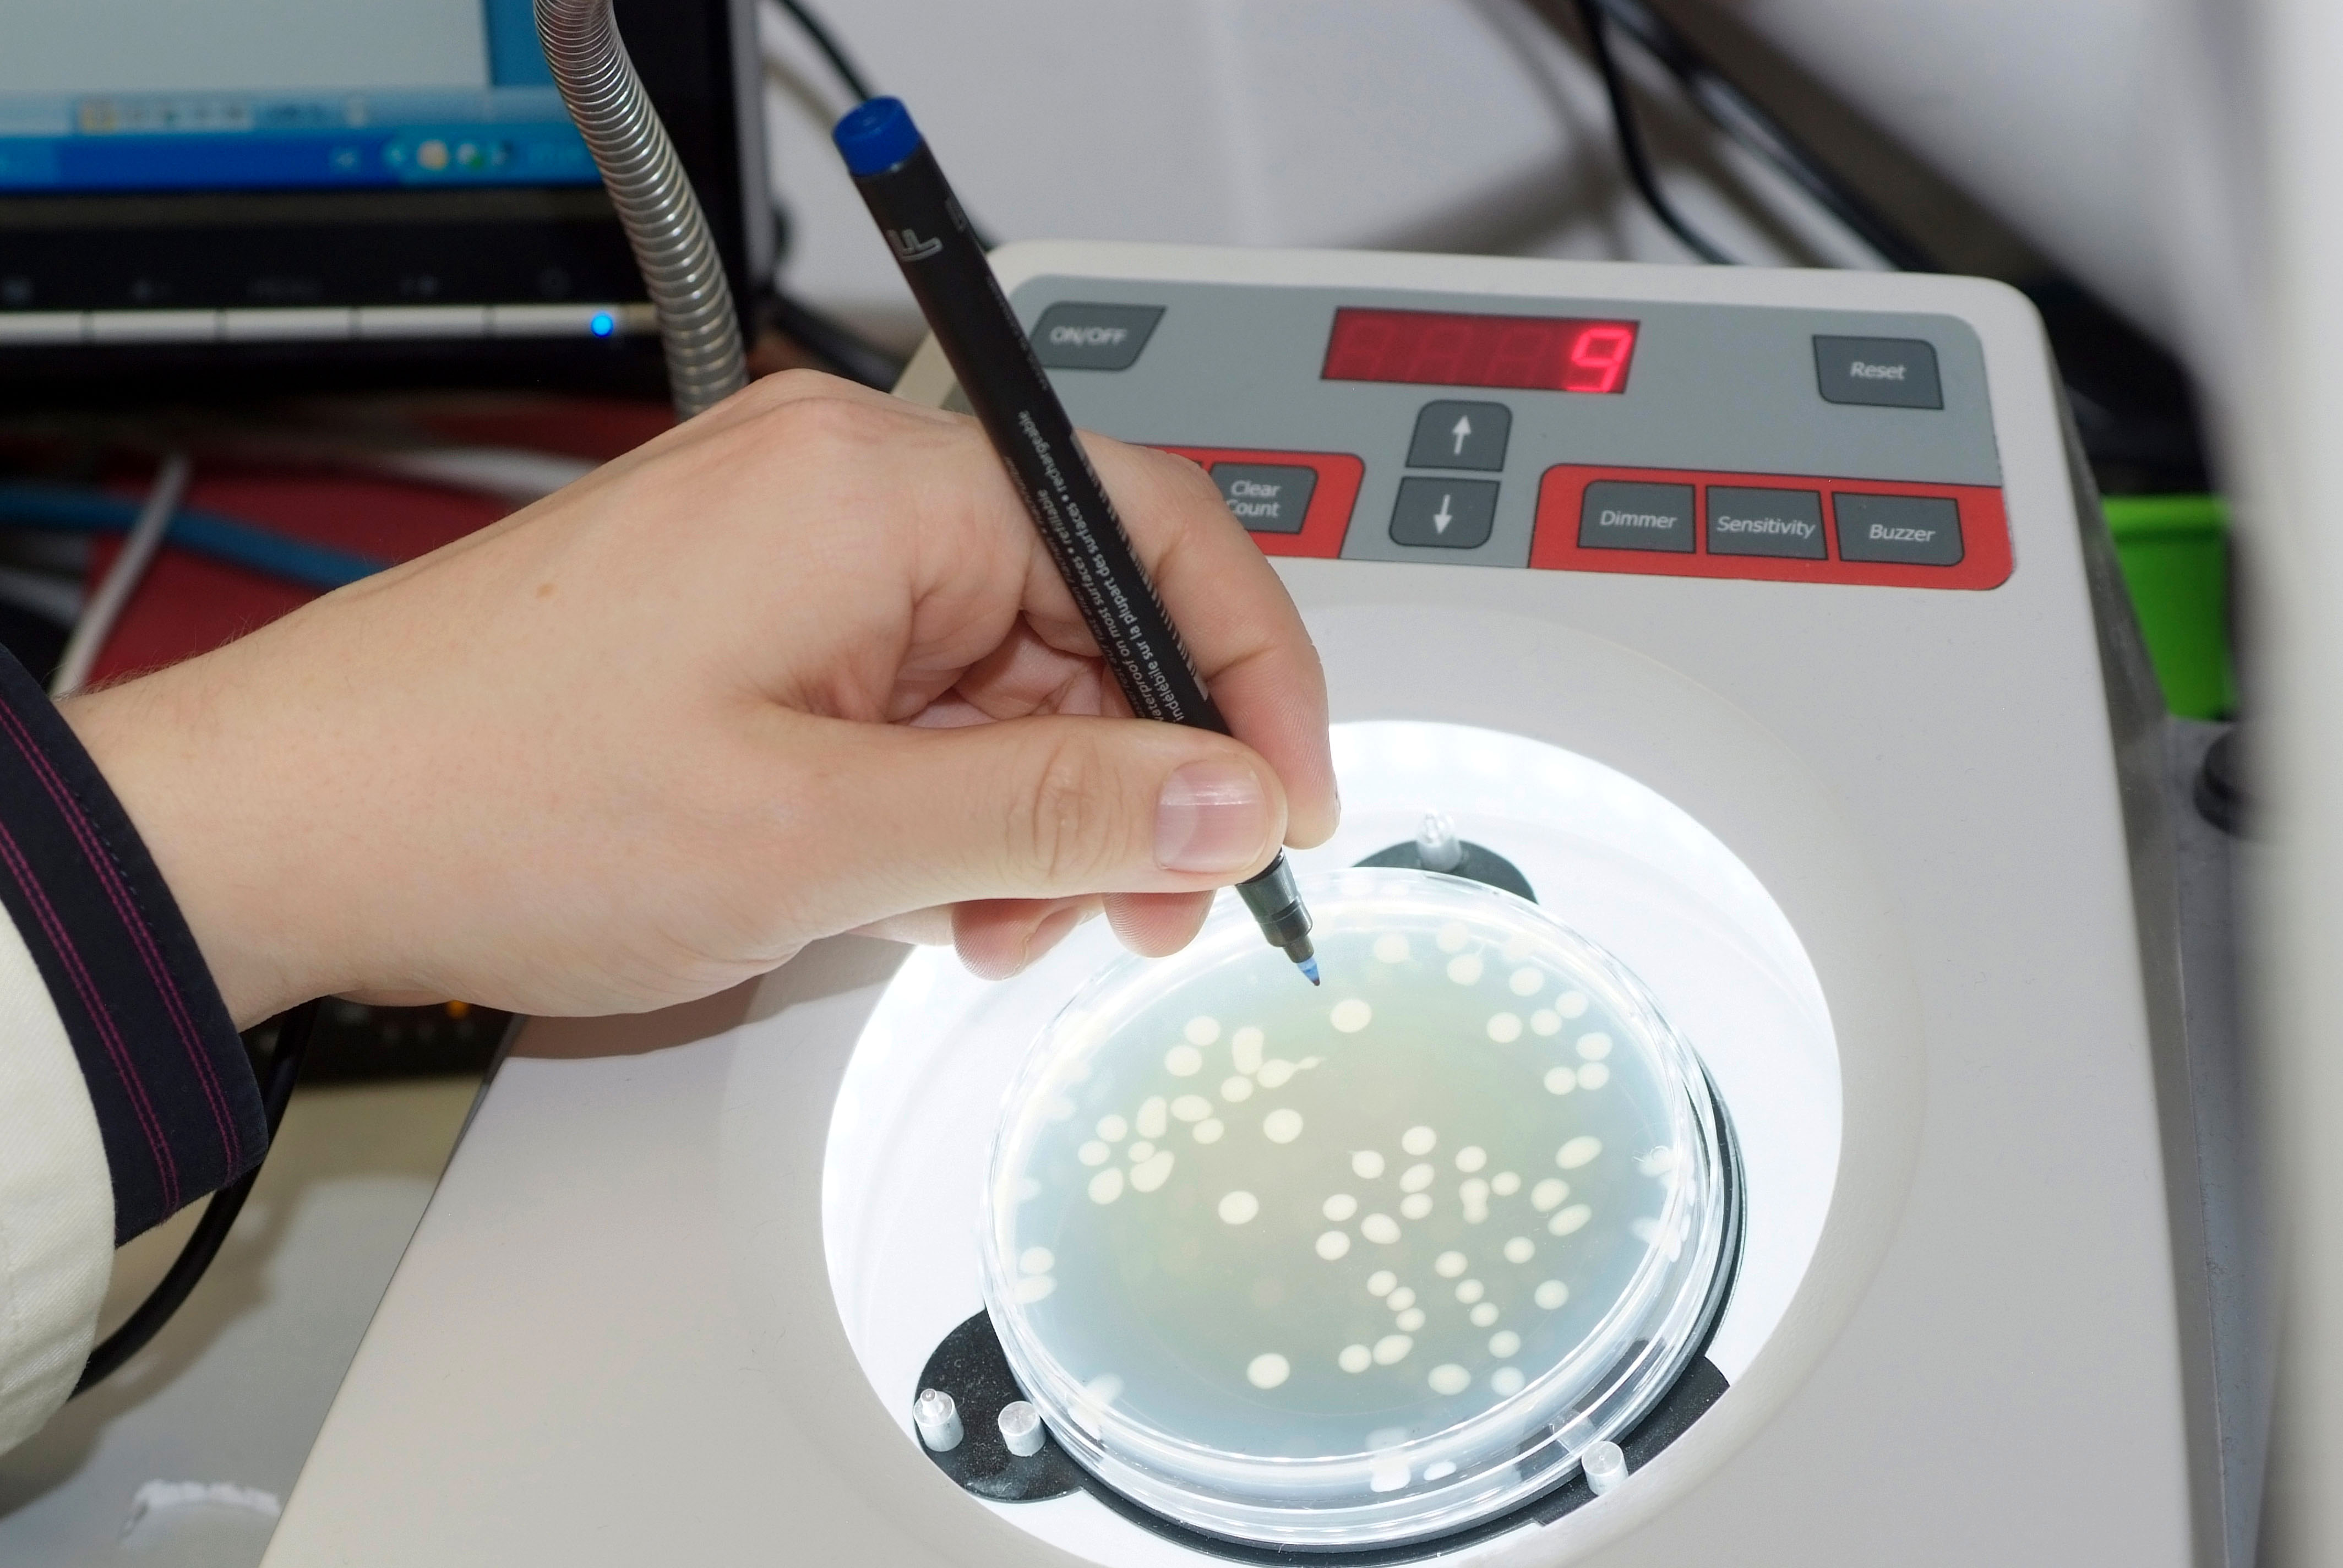 The photo shows a Petri dish with bacterial cultures and a hand holding a pen.